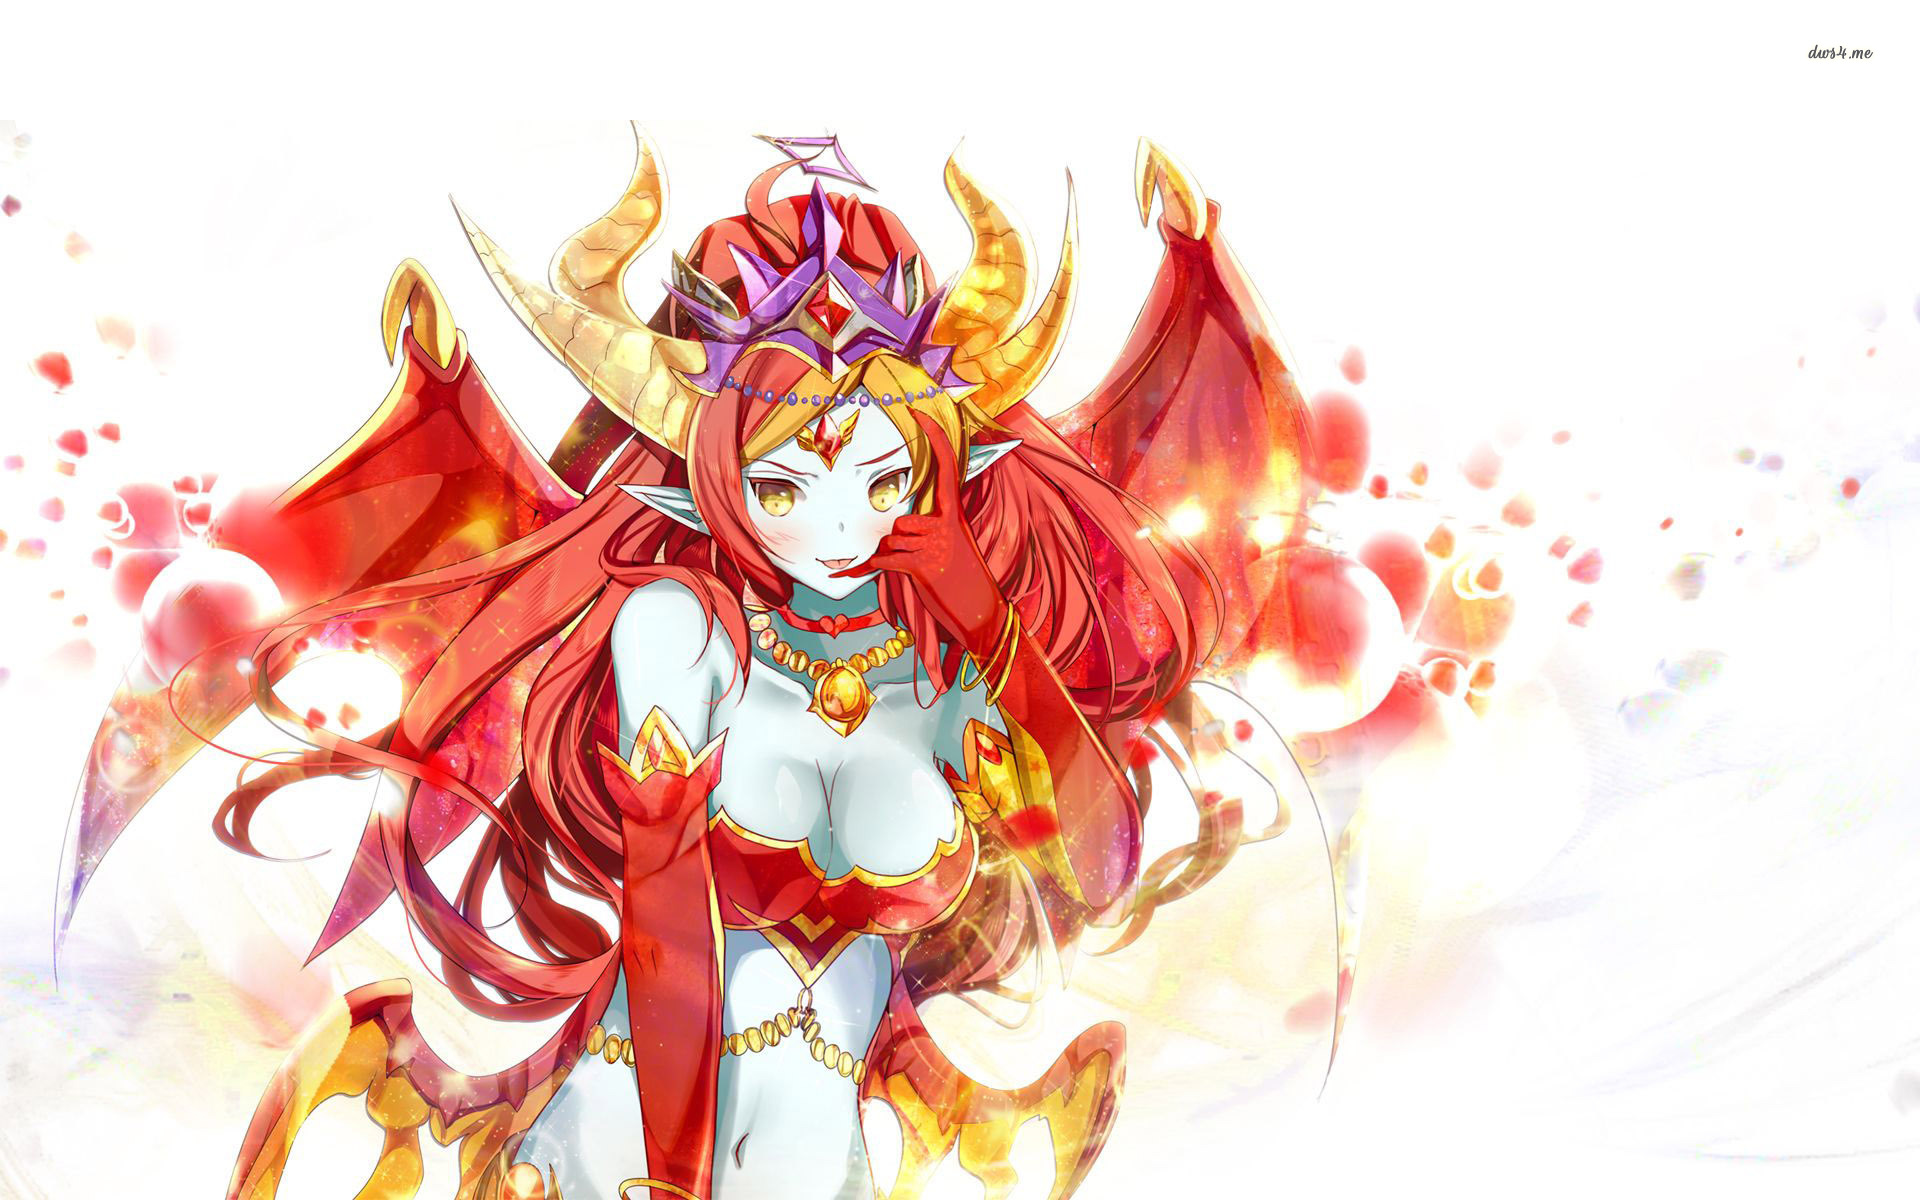 puzzle and dragons wallpaper,cg artwork,anime,illustration,fictional character,graphic design